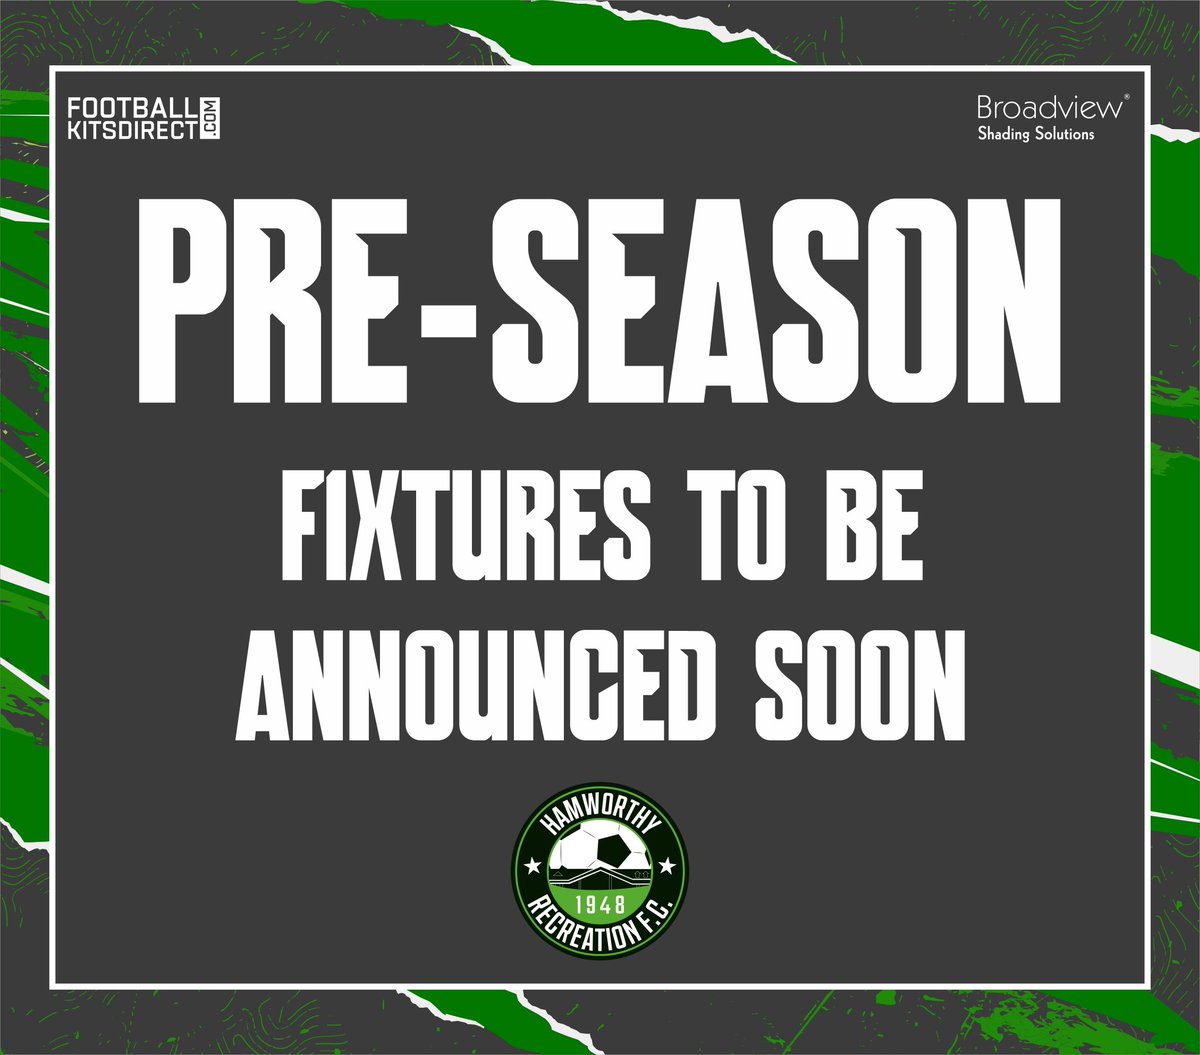 𝗣𝗿𝗲-𝗦𝗲𝗮𝘀𝗼𝗻 | 🗓 We are close to confirming all of our pre-season fixtures. Keep your eyes on our socials for all info.